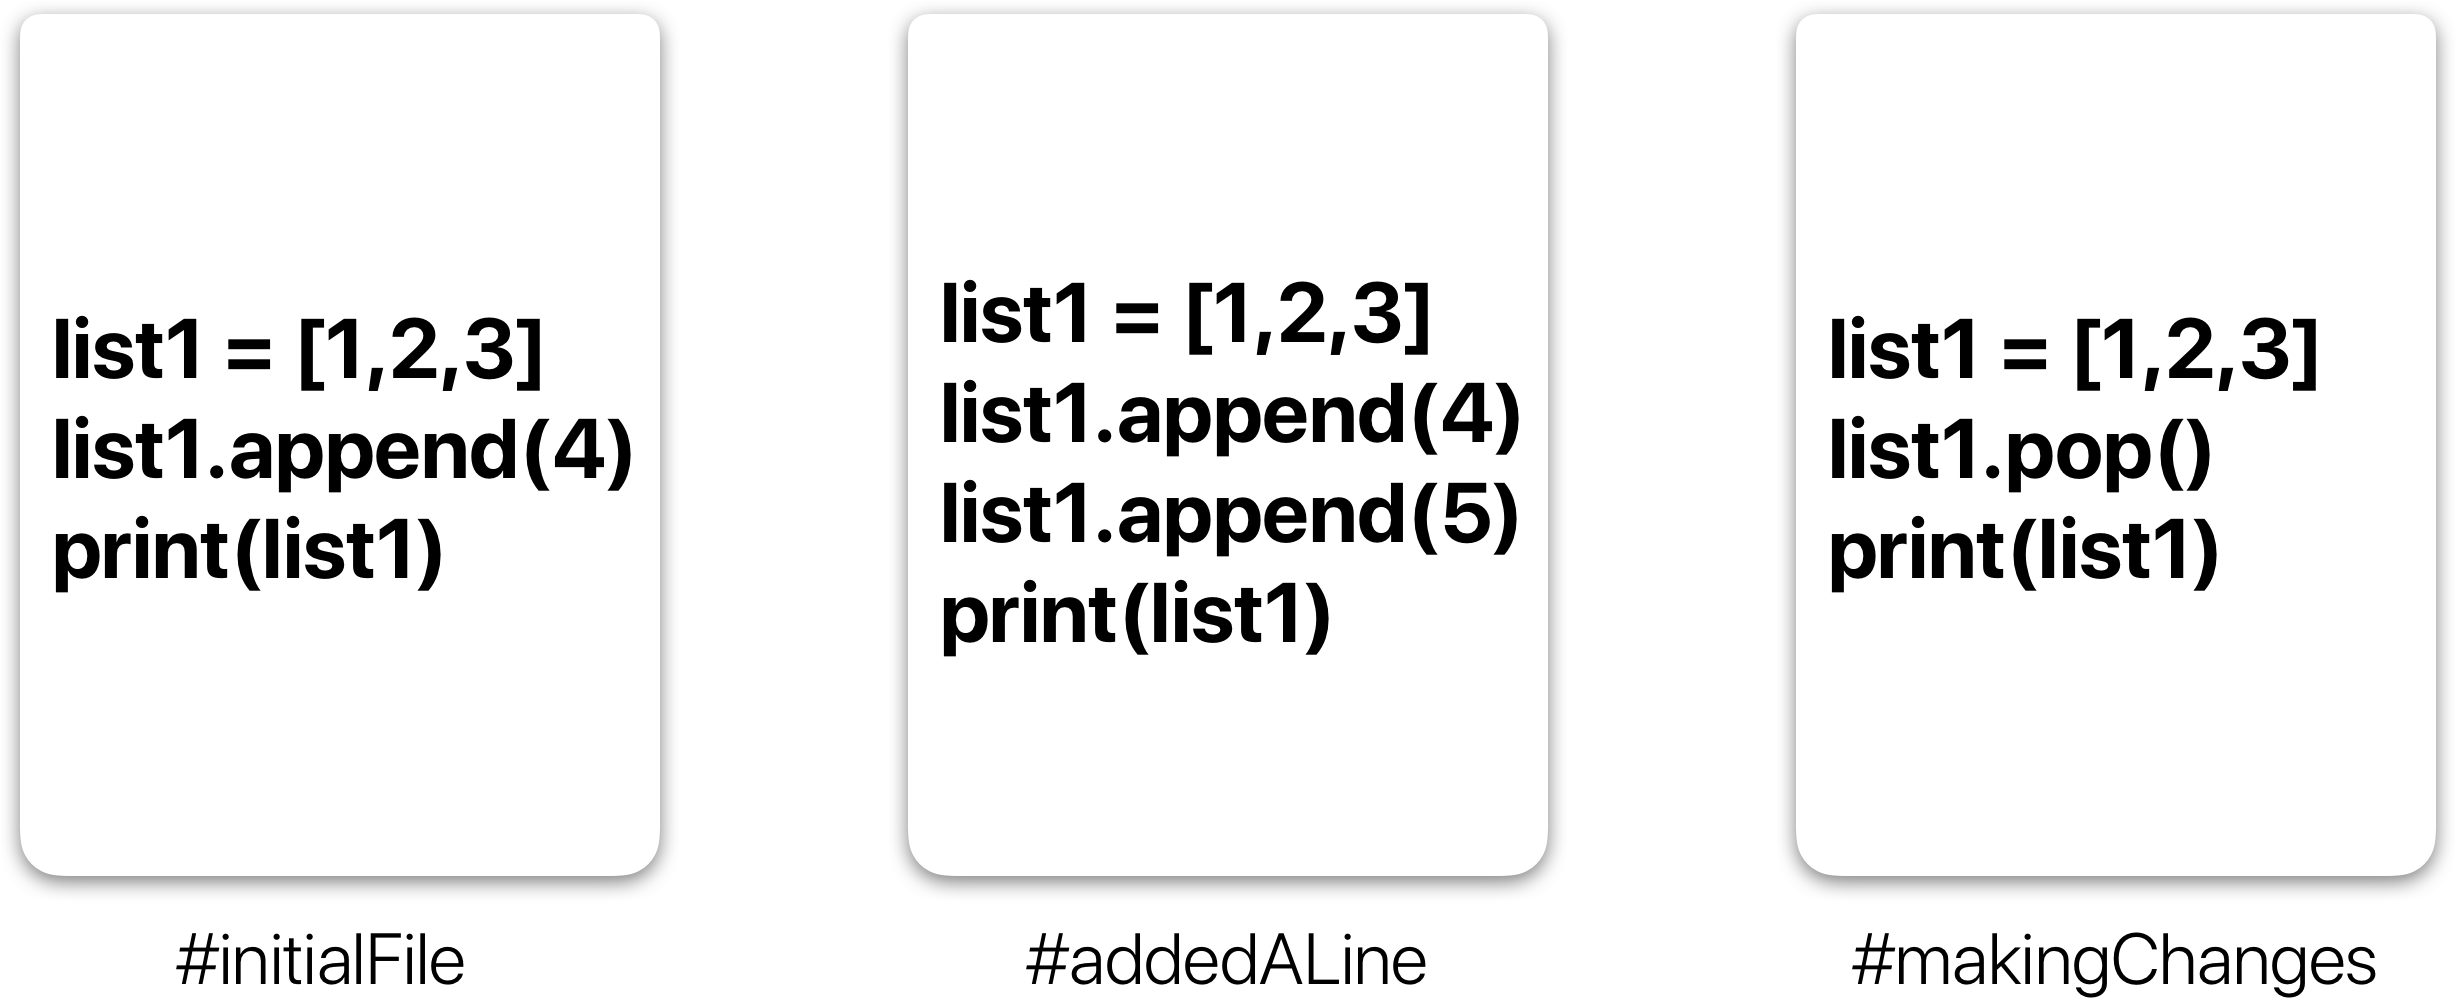 A simple example of version history of a file.